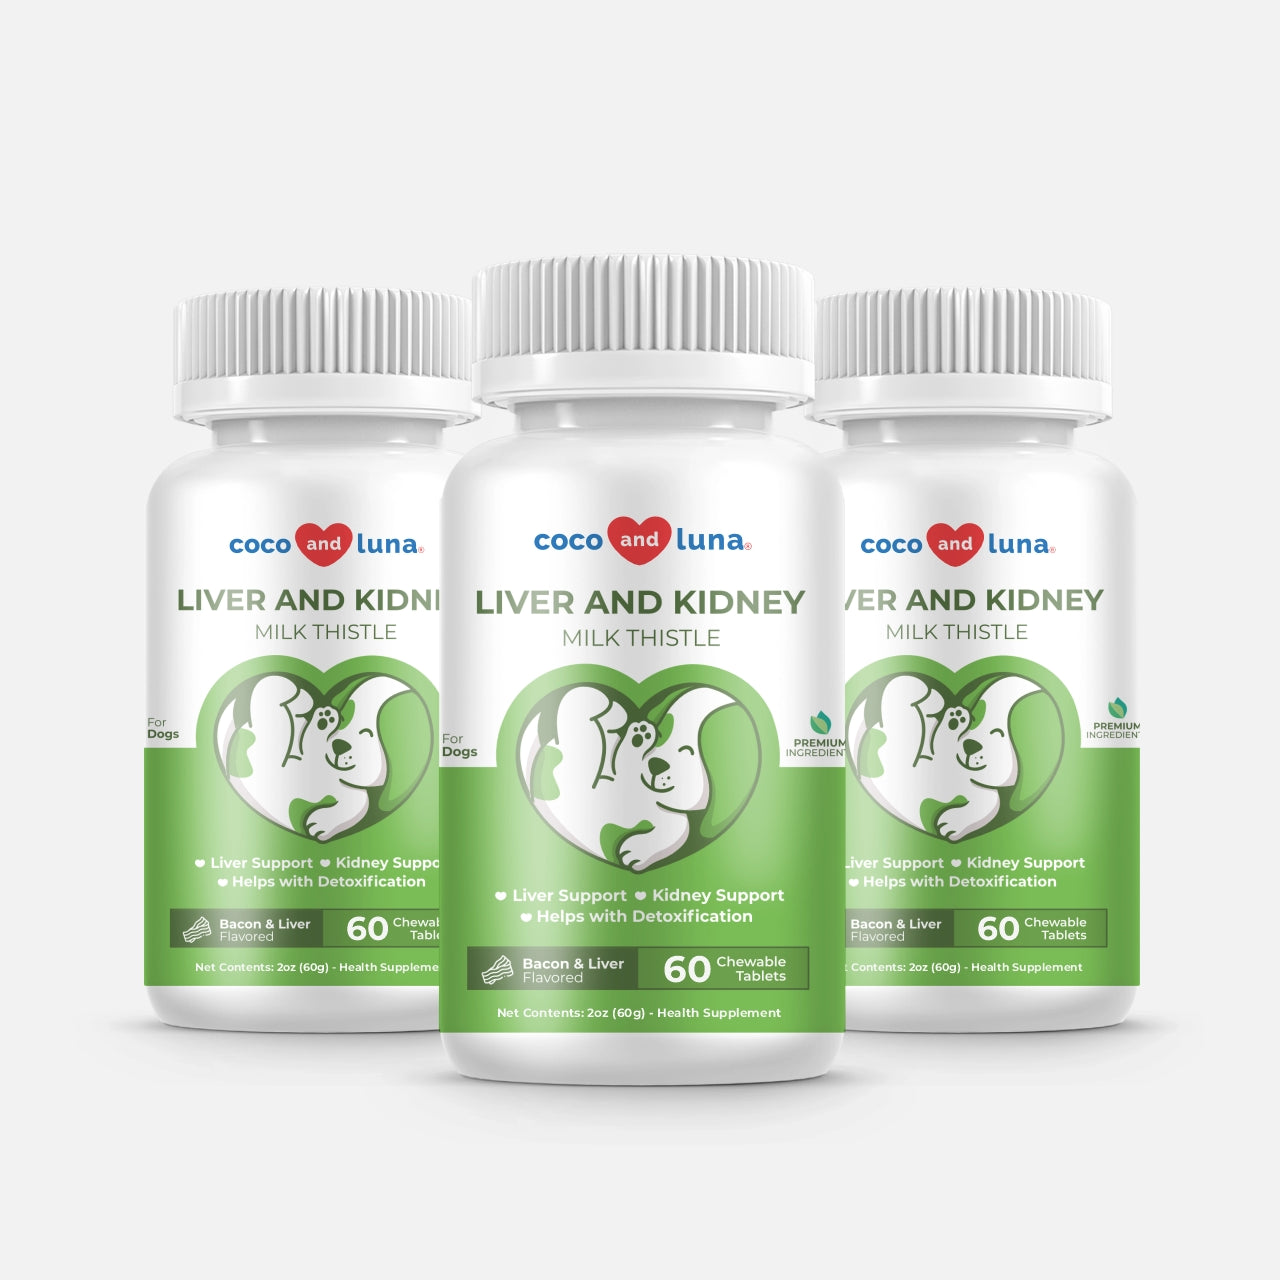 Liver and Kidney for Dogs - 3 Pack 60 Tablets - Coco and Luna